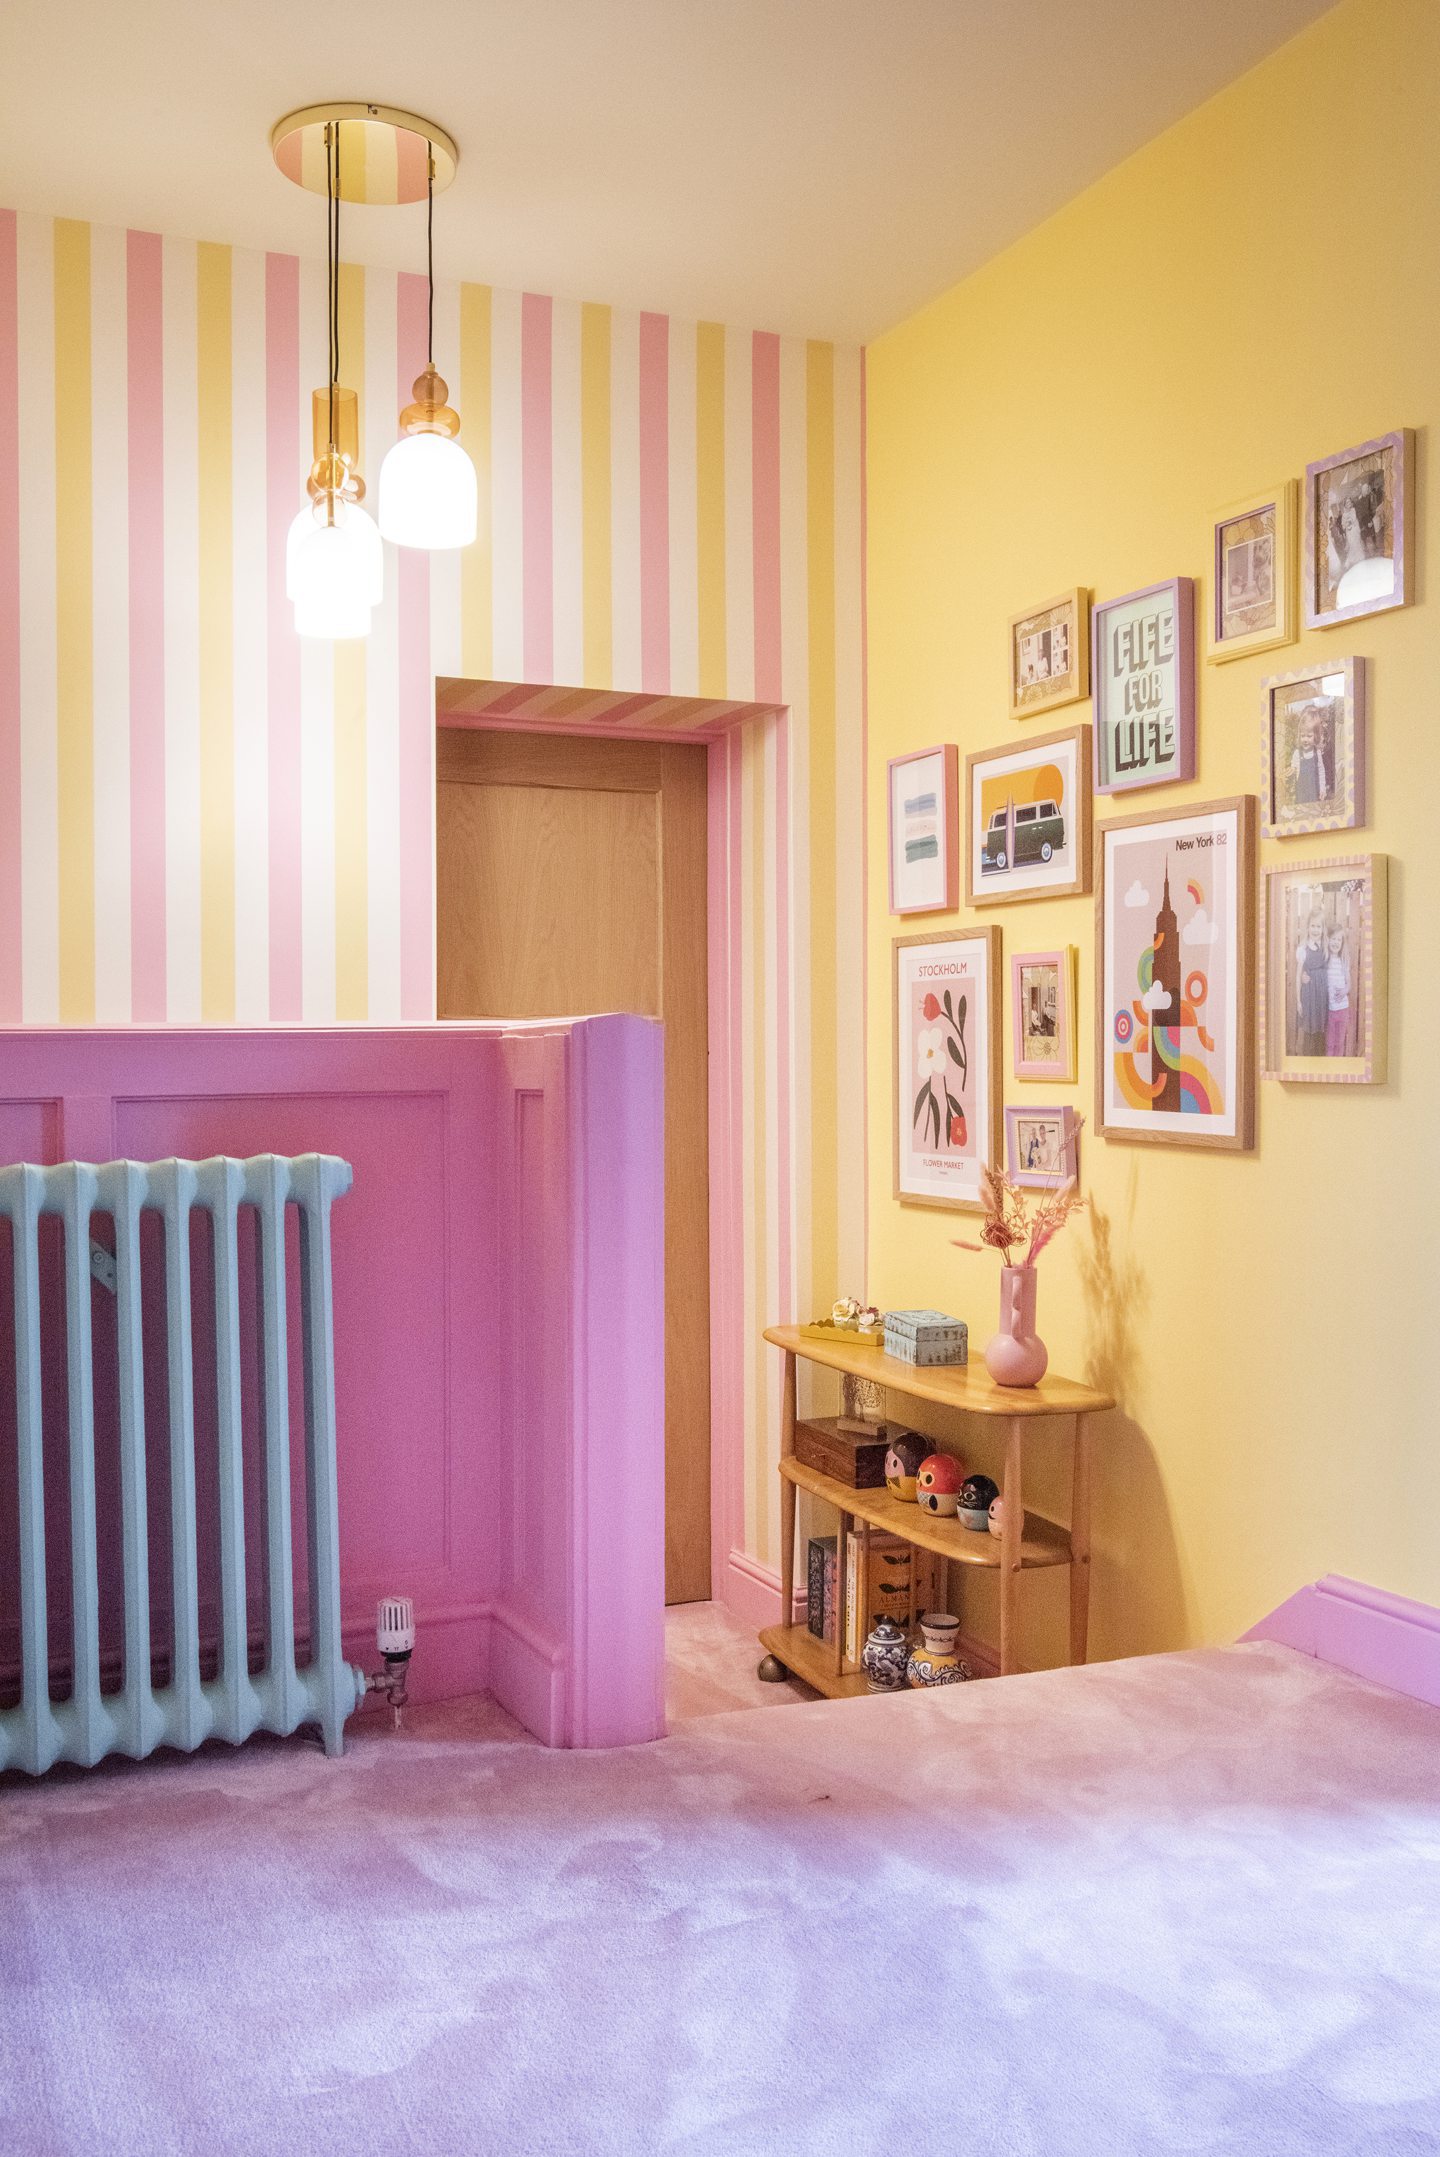 The landing of the house, with yellow and pink walls, which is full of vintage and mid-century furniture. 